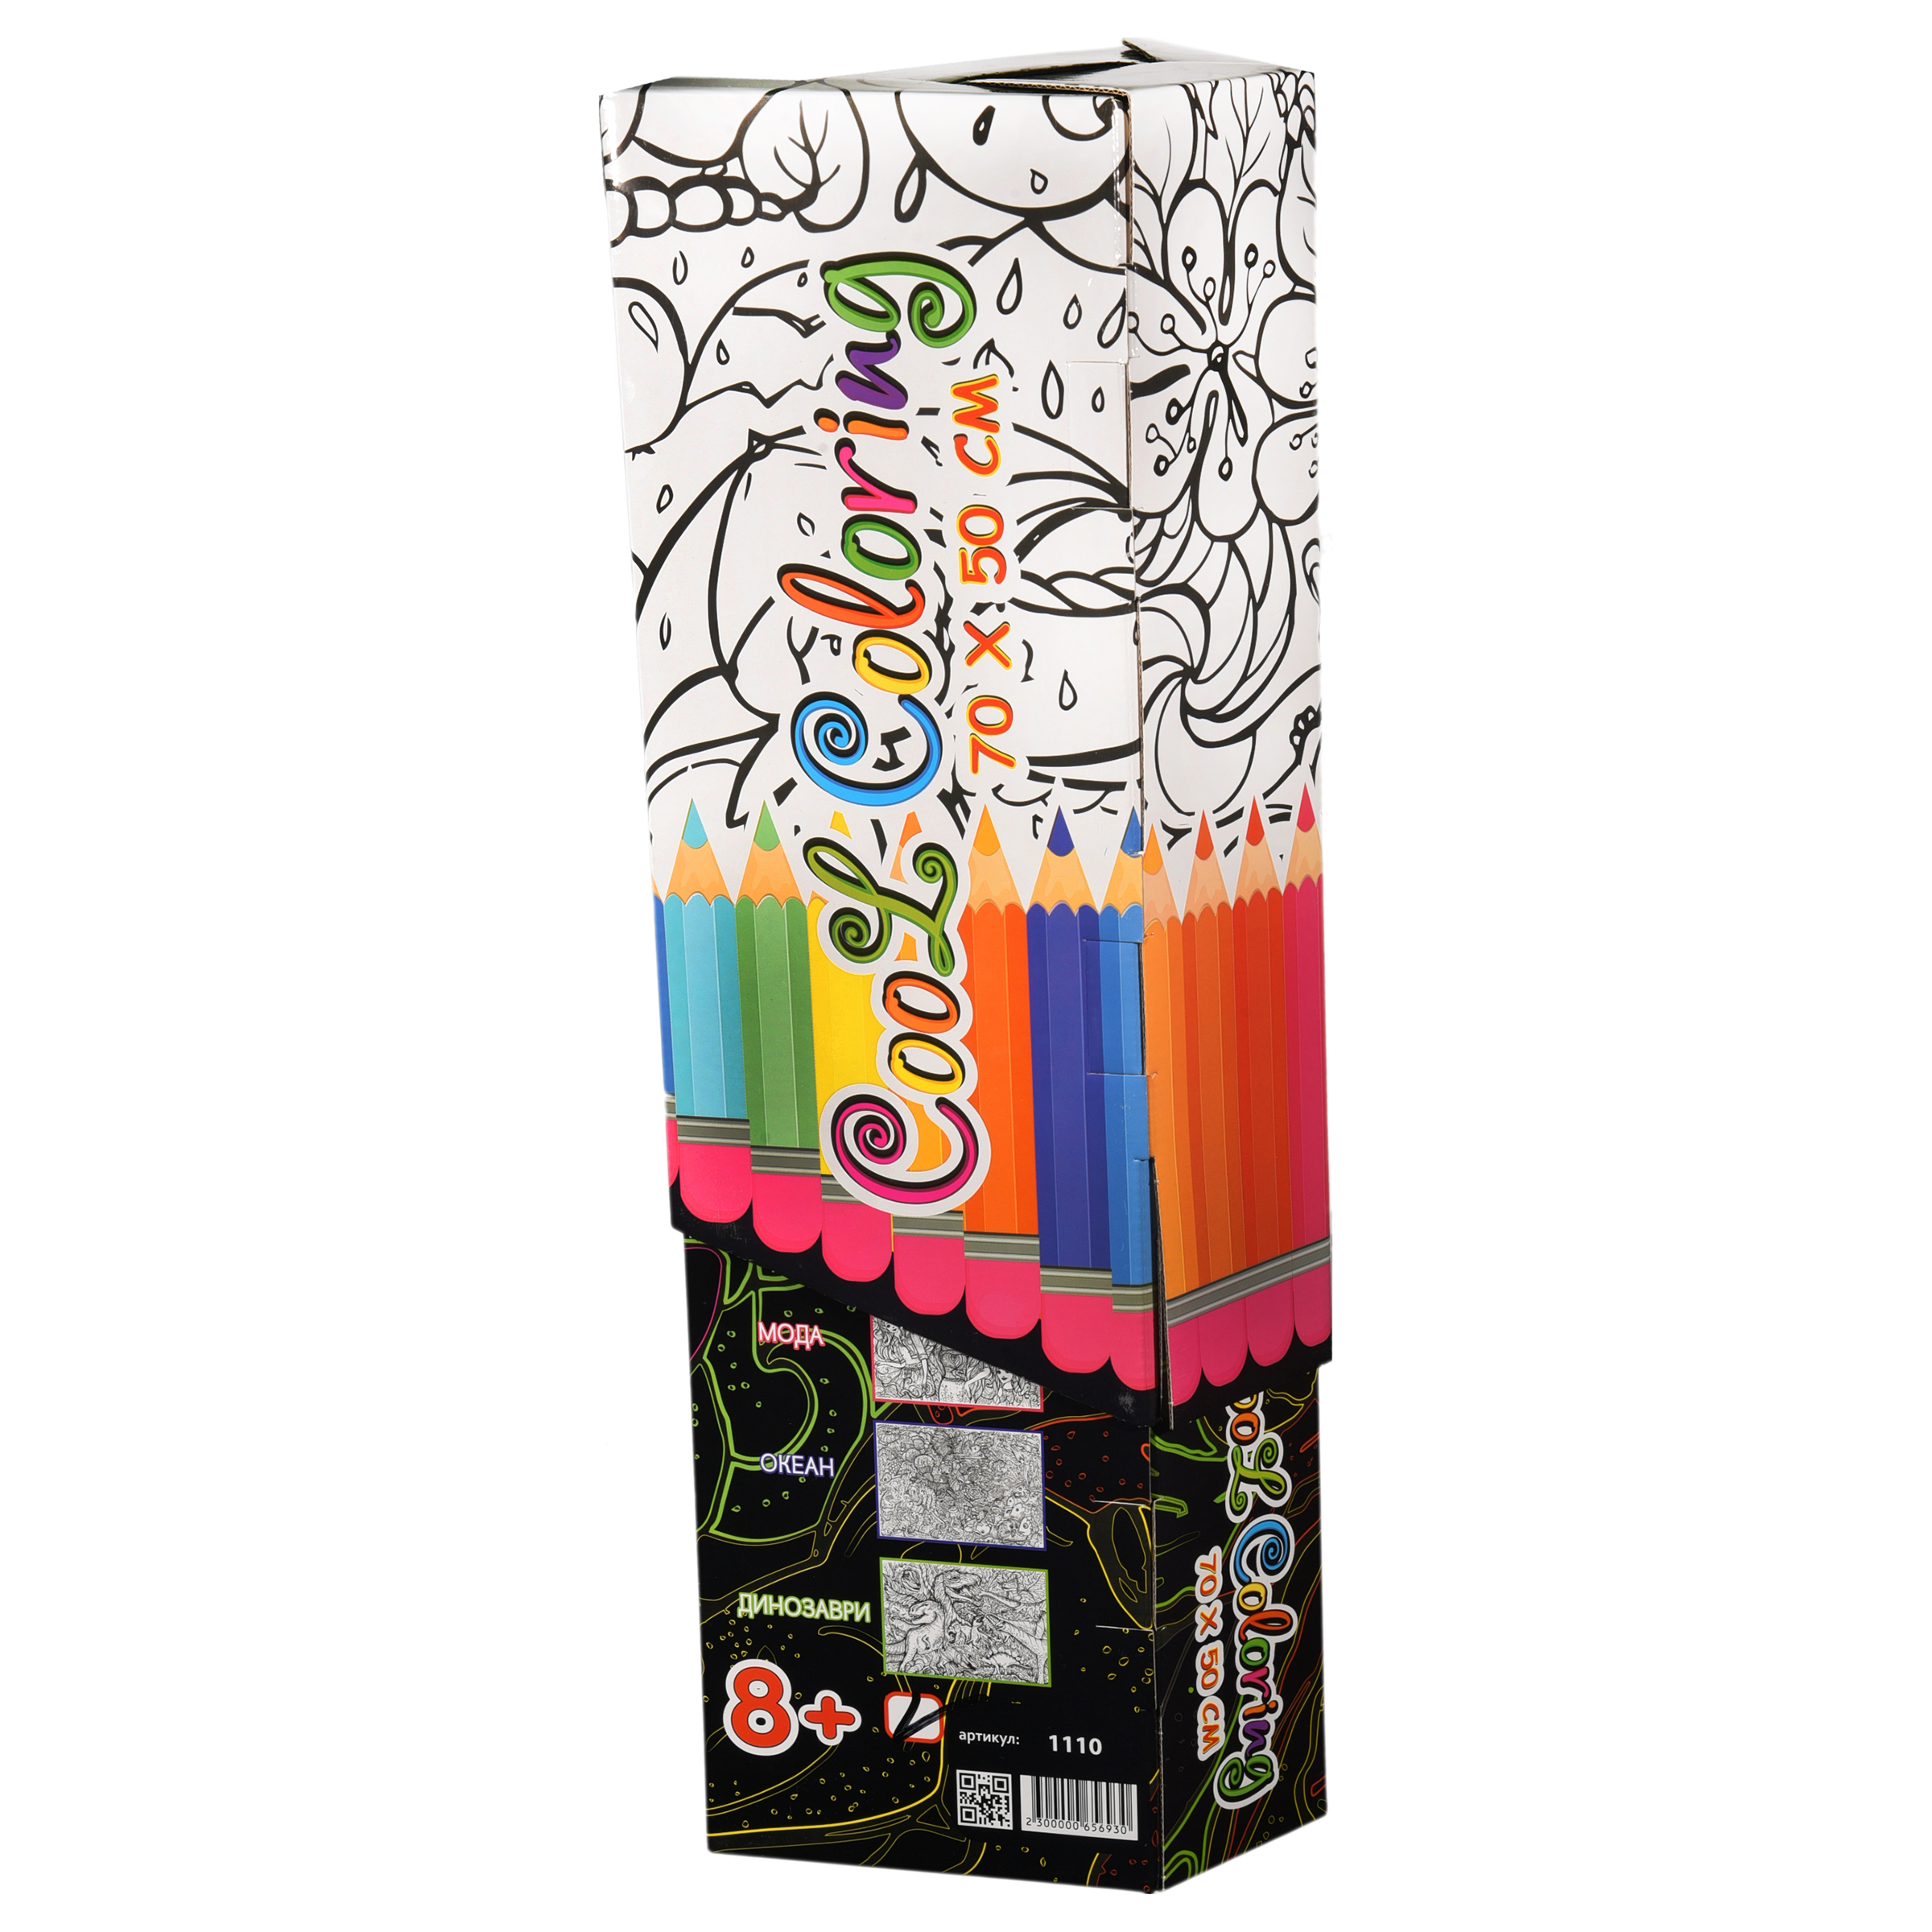 MAXI coloring book "Cool coloring for kids vikom 8+" (ukr.) (1110)